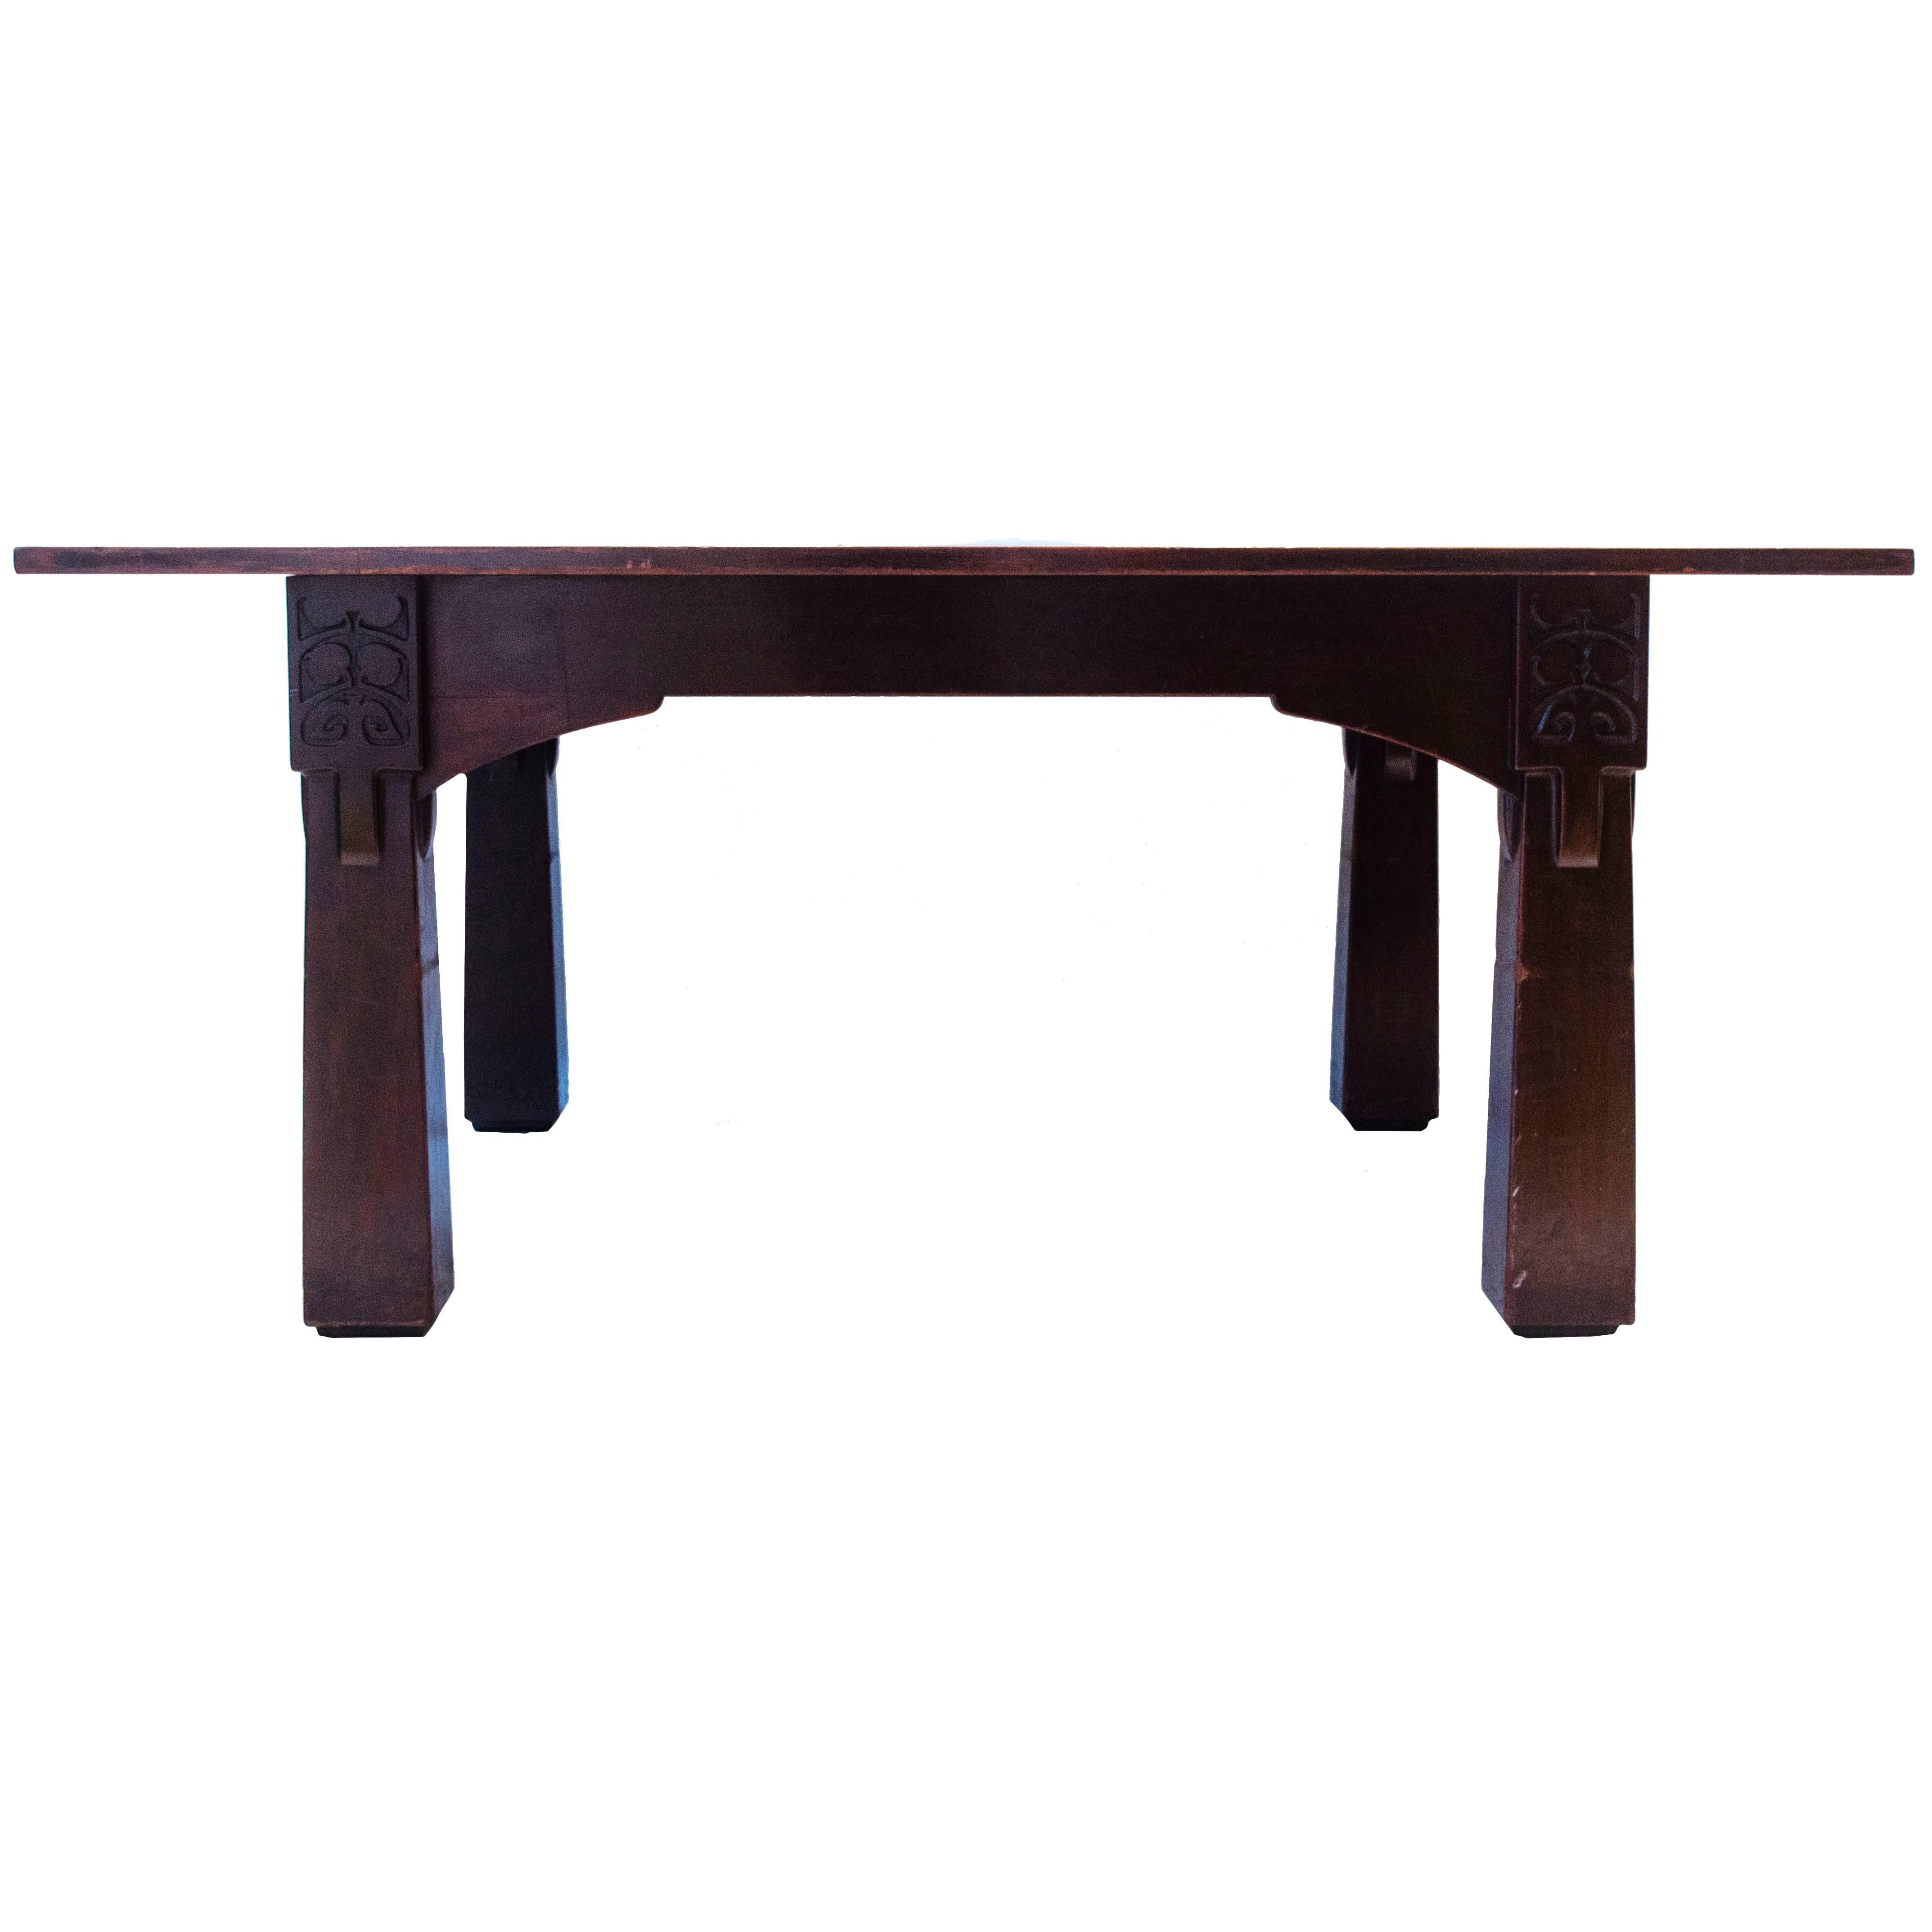 M H Baillie Scott A Cuban Mahogany Dining Table From The Liverpool School Of Art For Sale